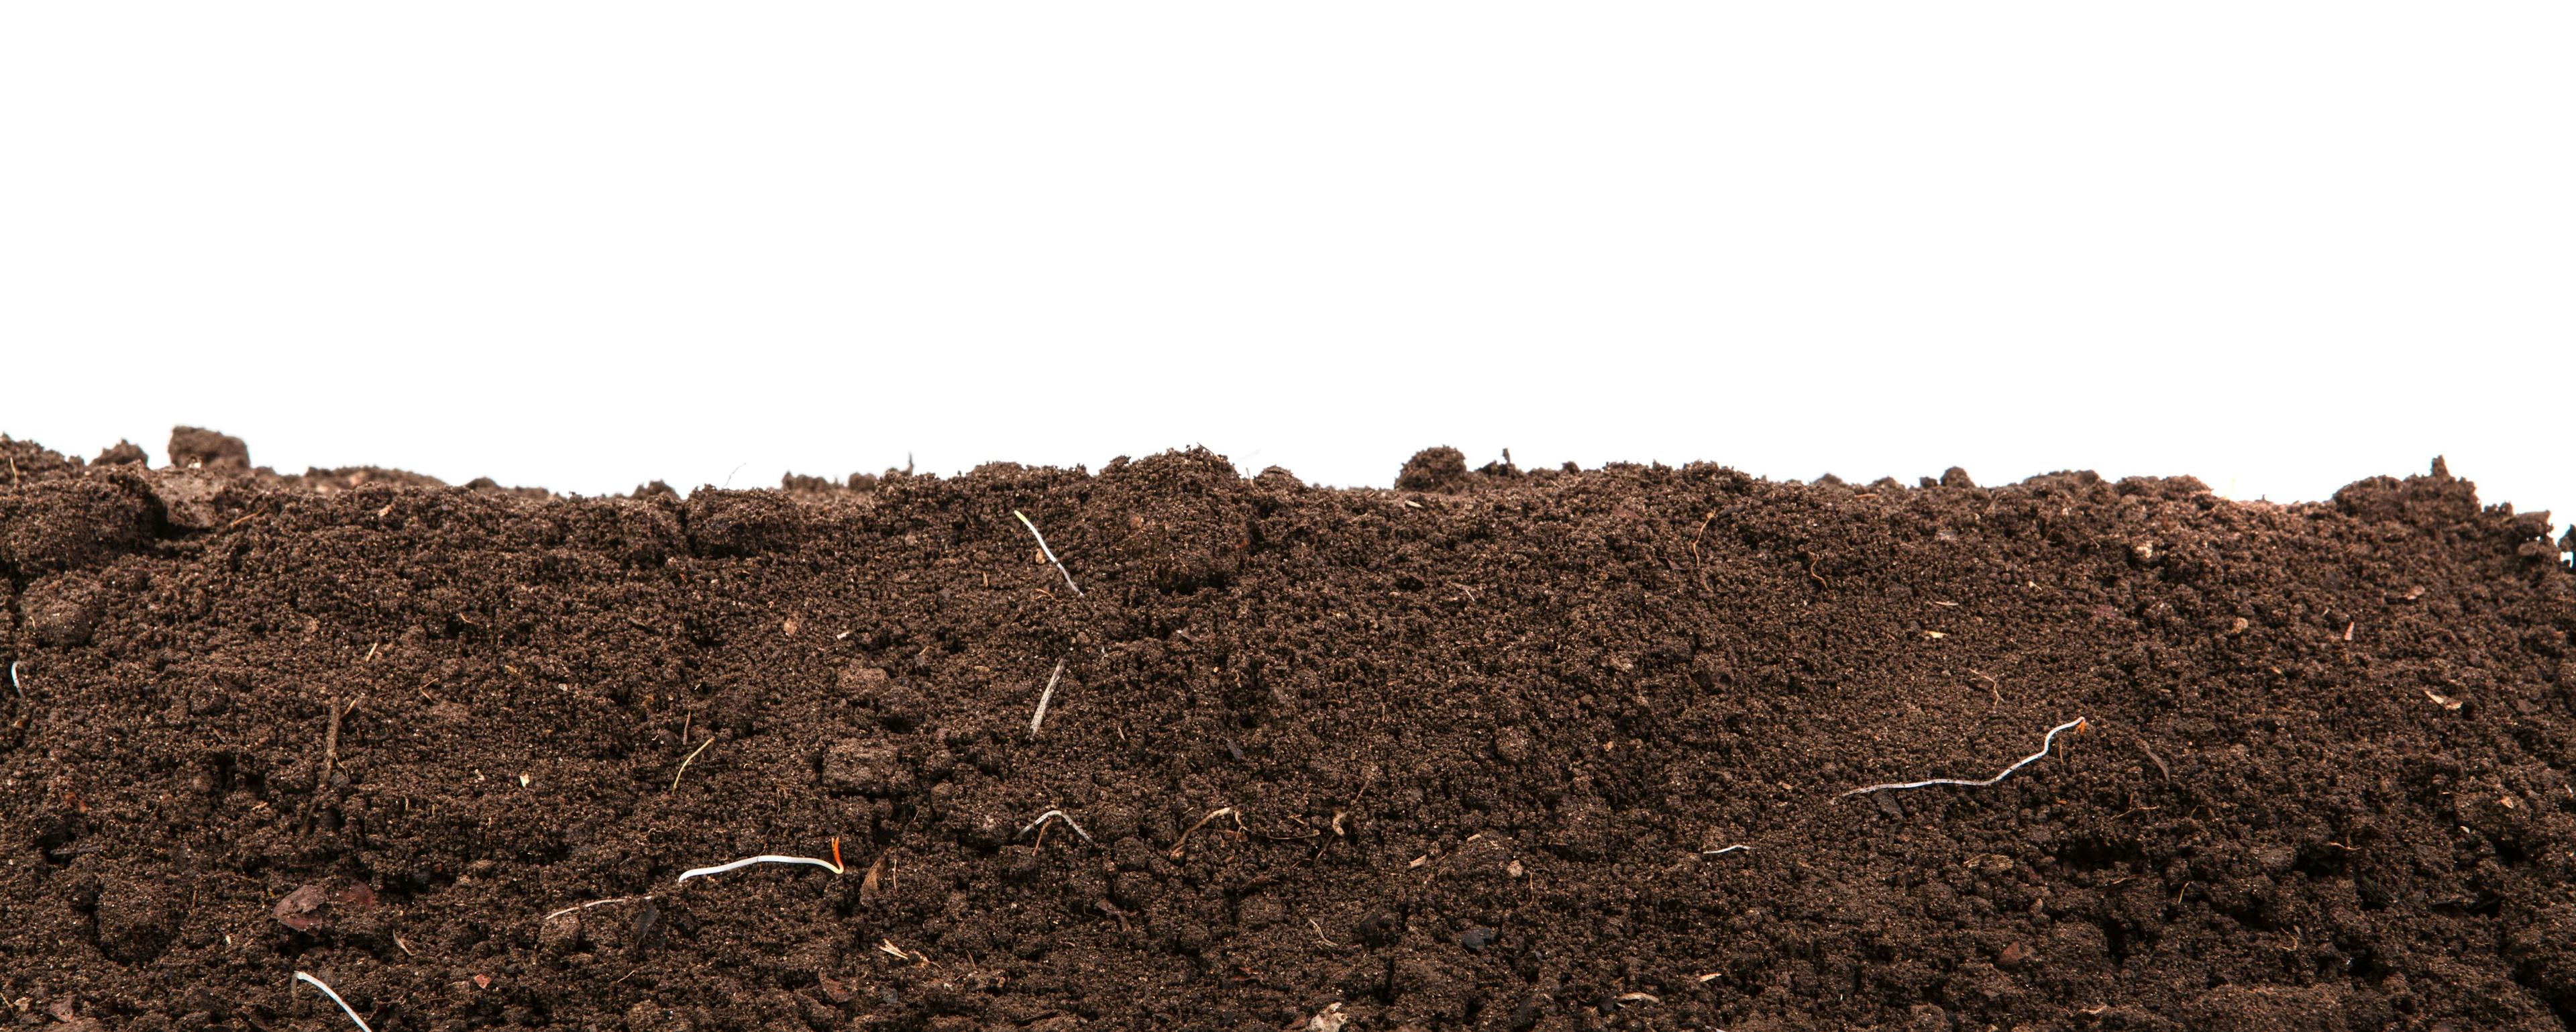 Handful of dark brown soil isolated on white background | Image Credit: © toomler - stock.adobe.com